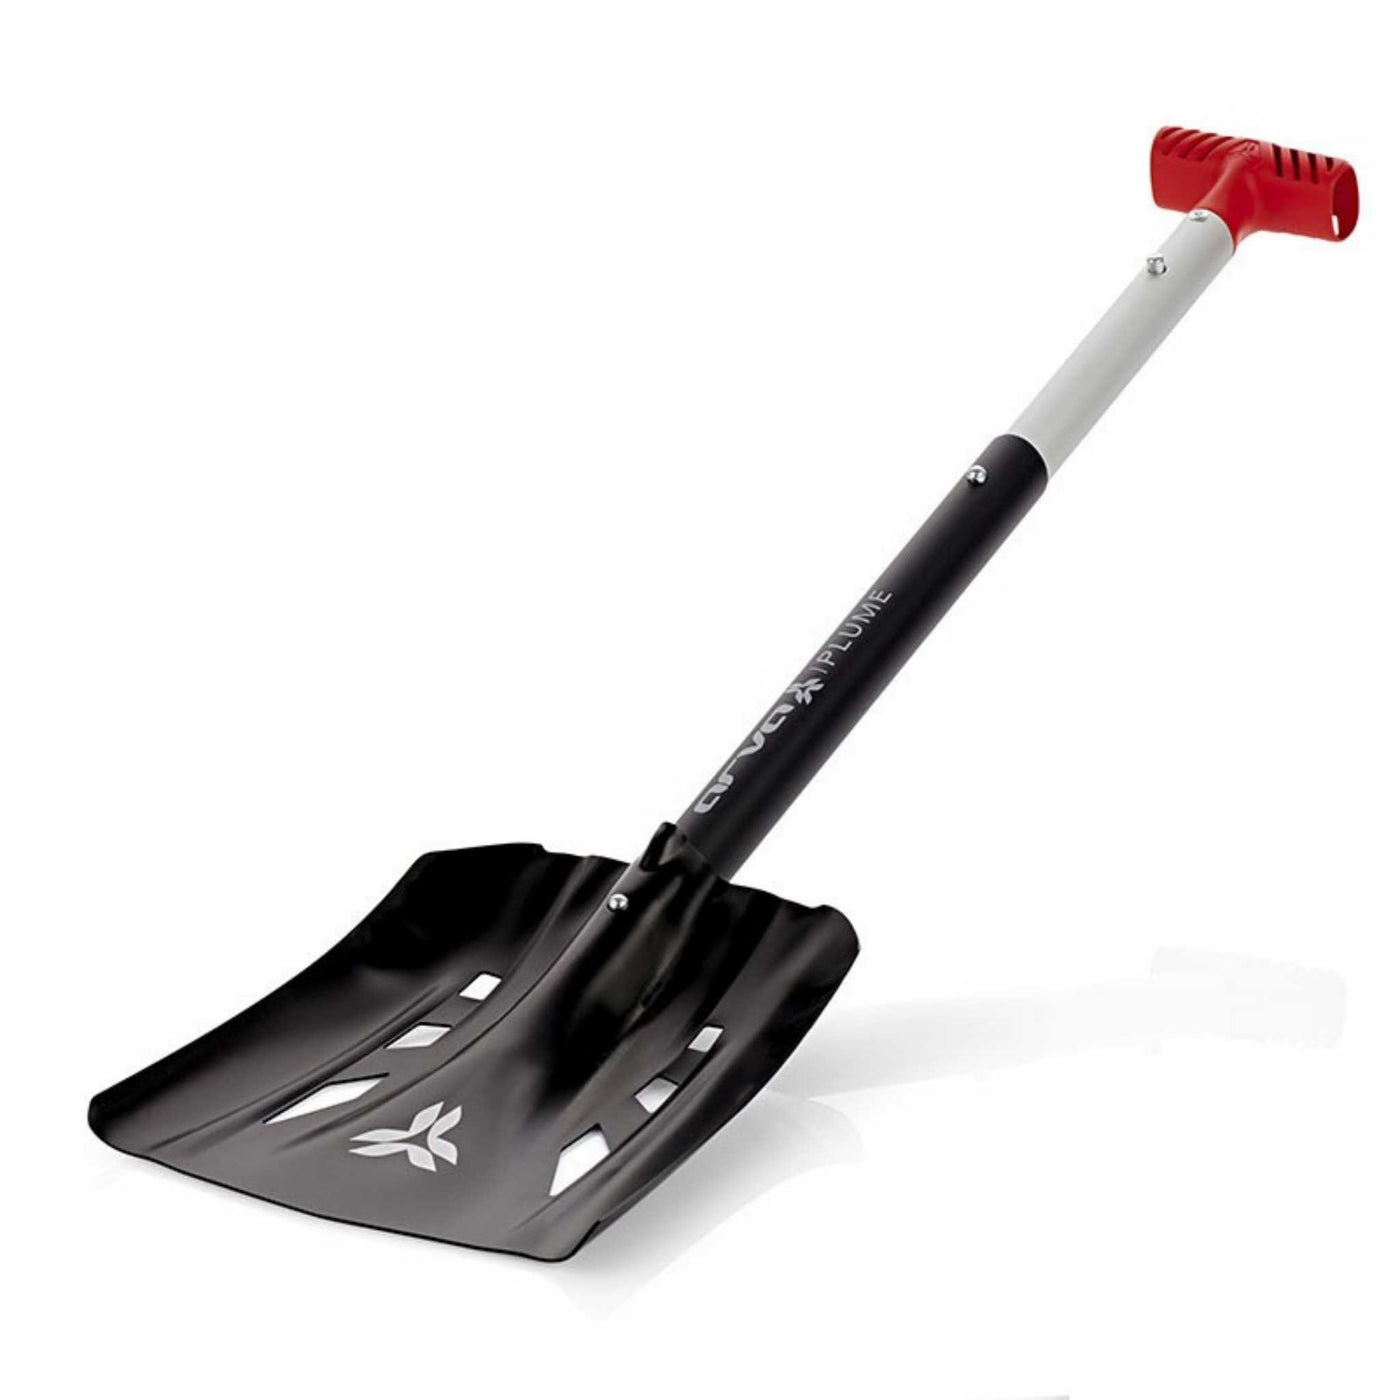 Arva Plume TS Shovel | Backcountry Avalanche Rescue Shovel | Further Faster Christchurch NZ